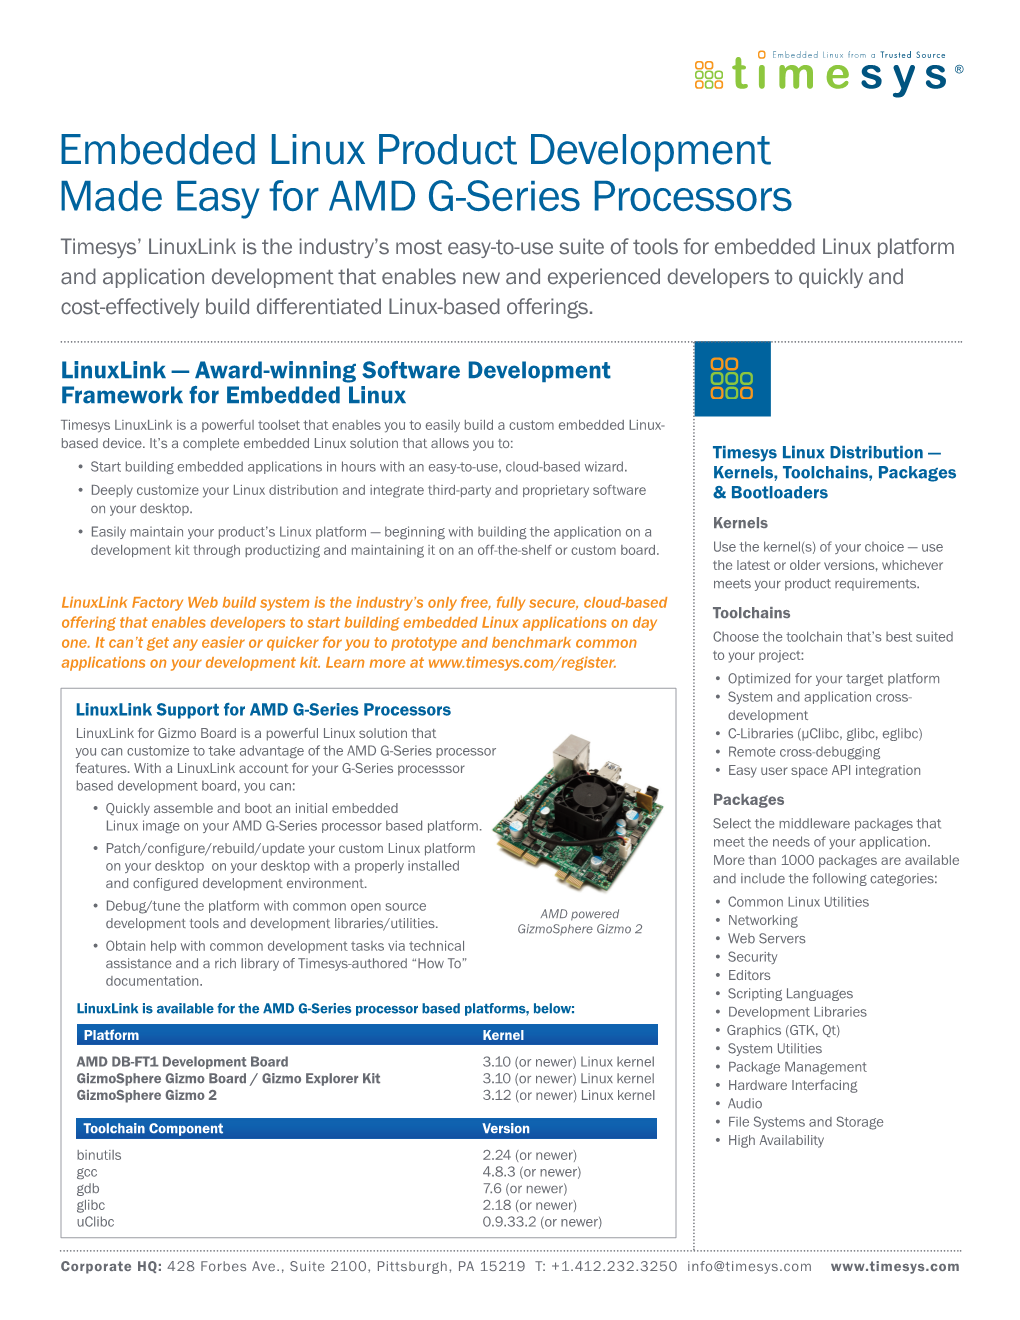 Timesys Embedded Linux Solutions for AMD G-Series Processors